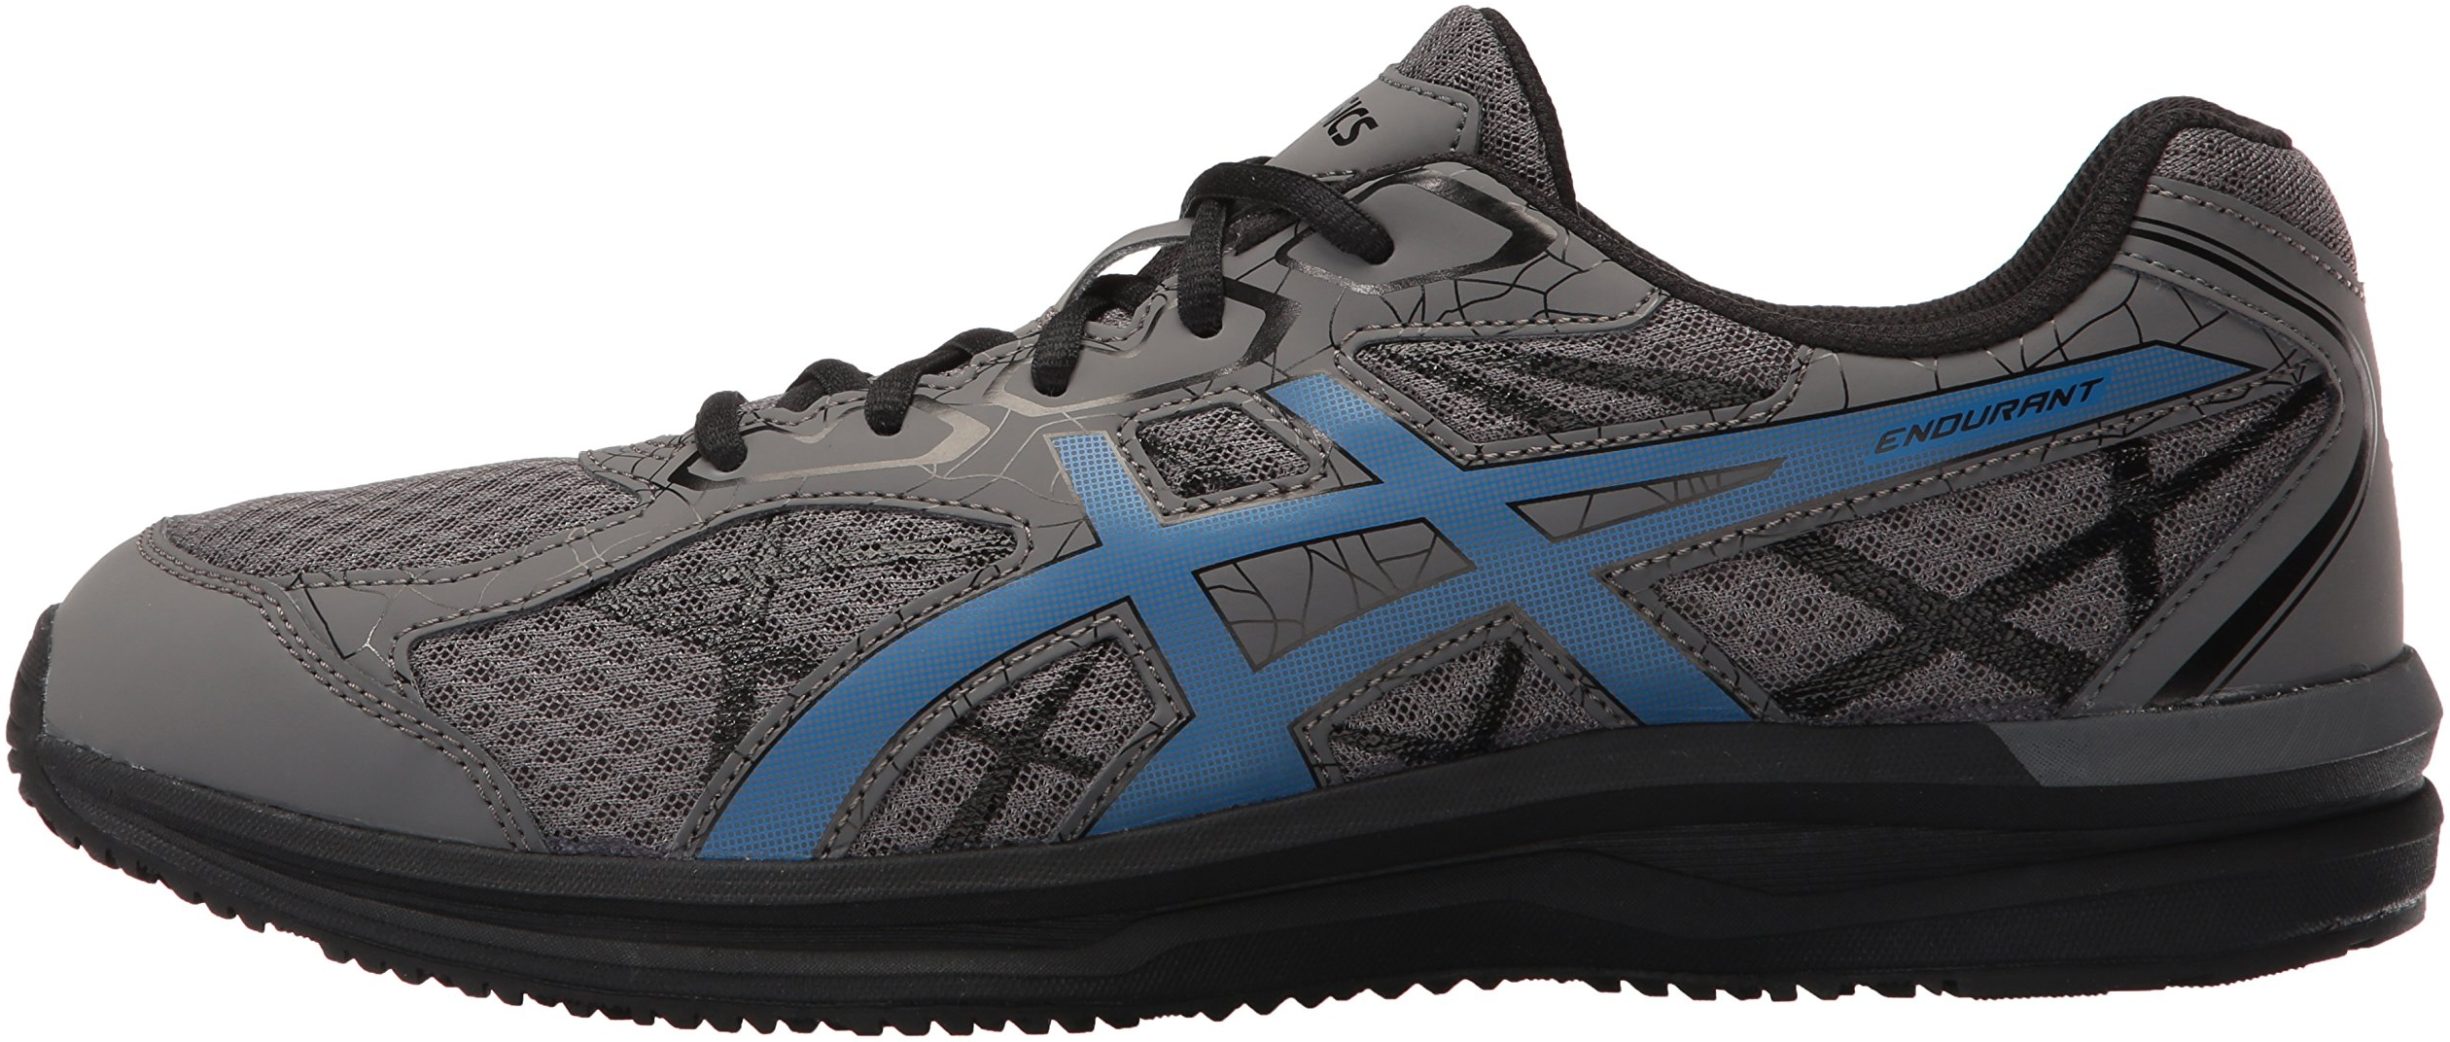 Only $45 + Review of Asics Endurant | RunRepeat